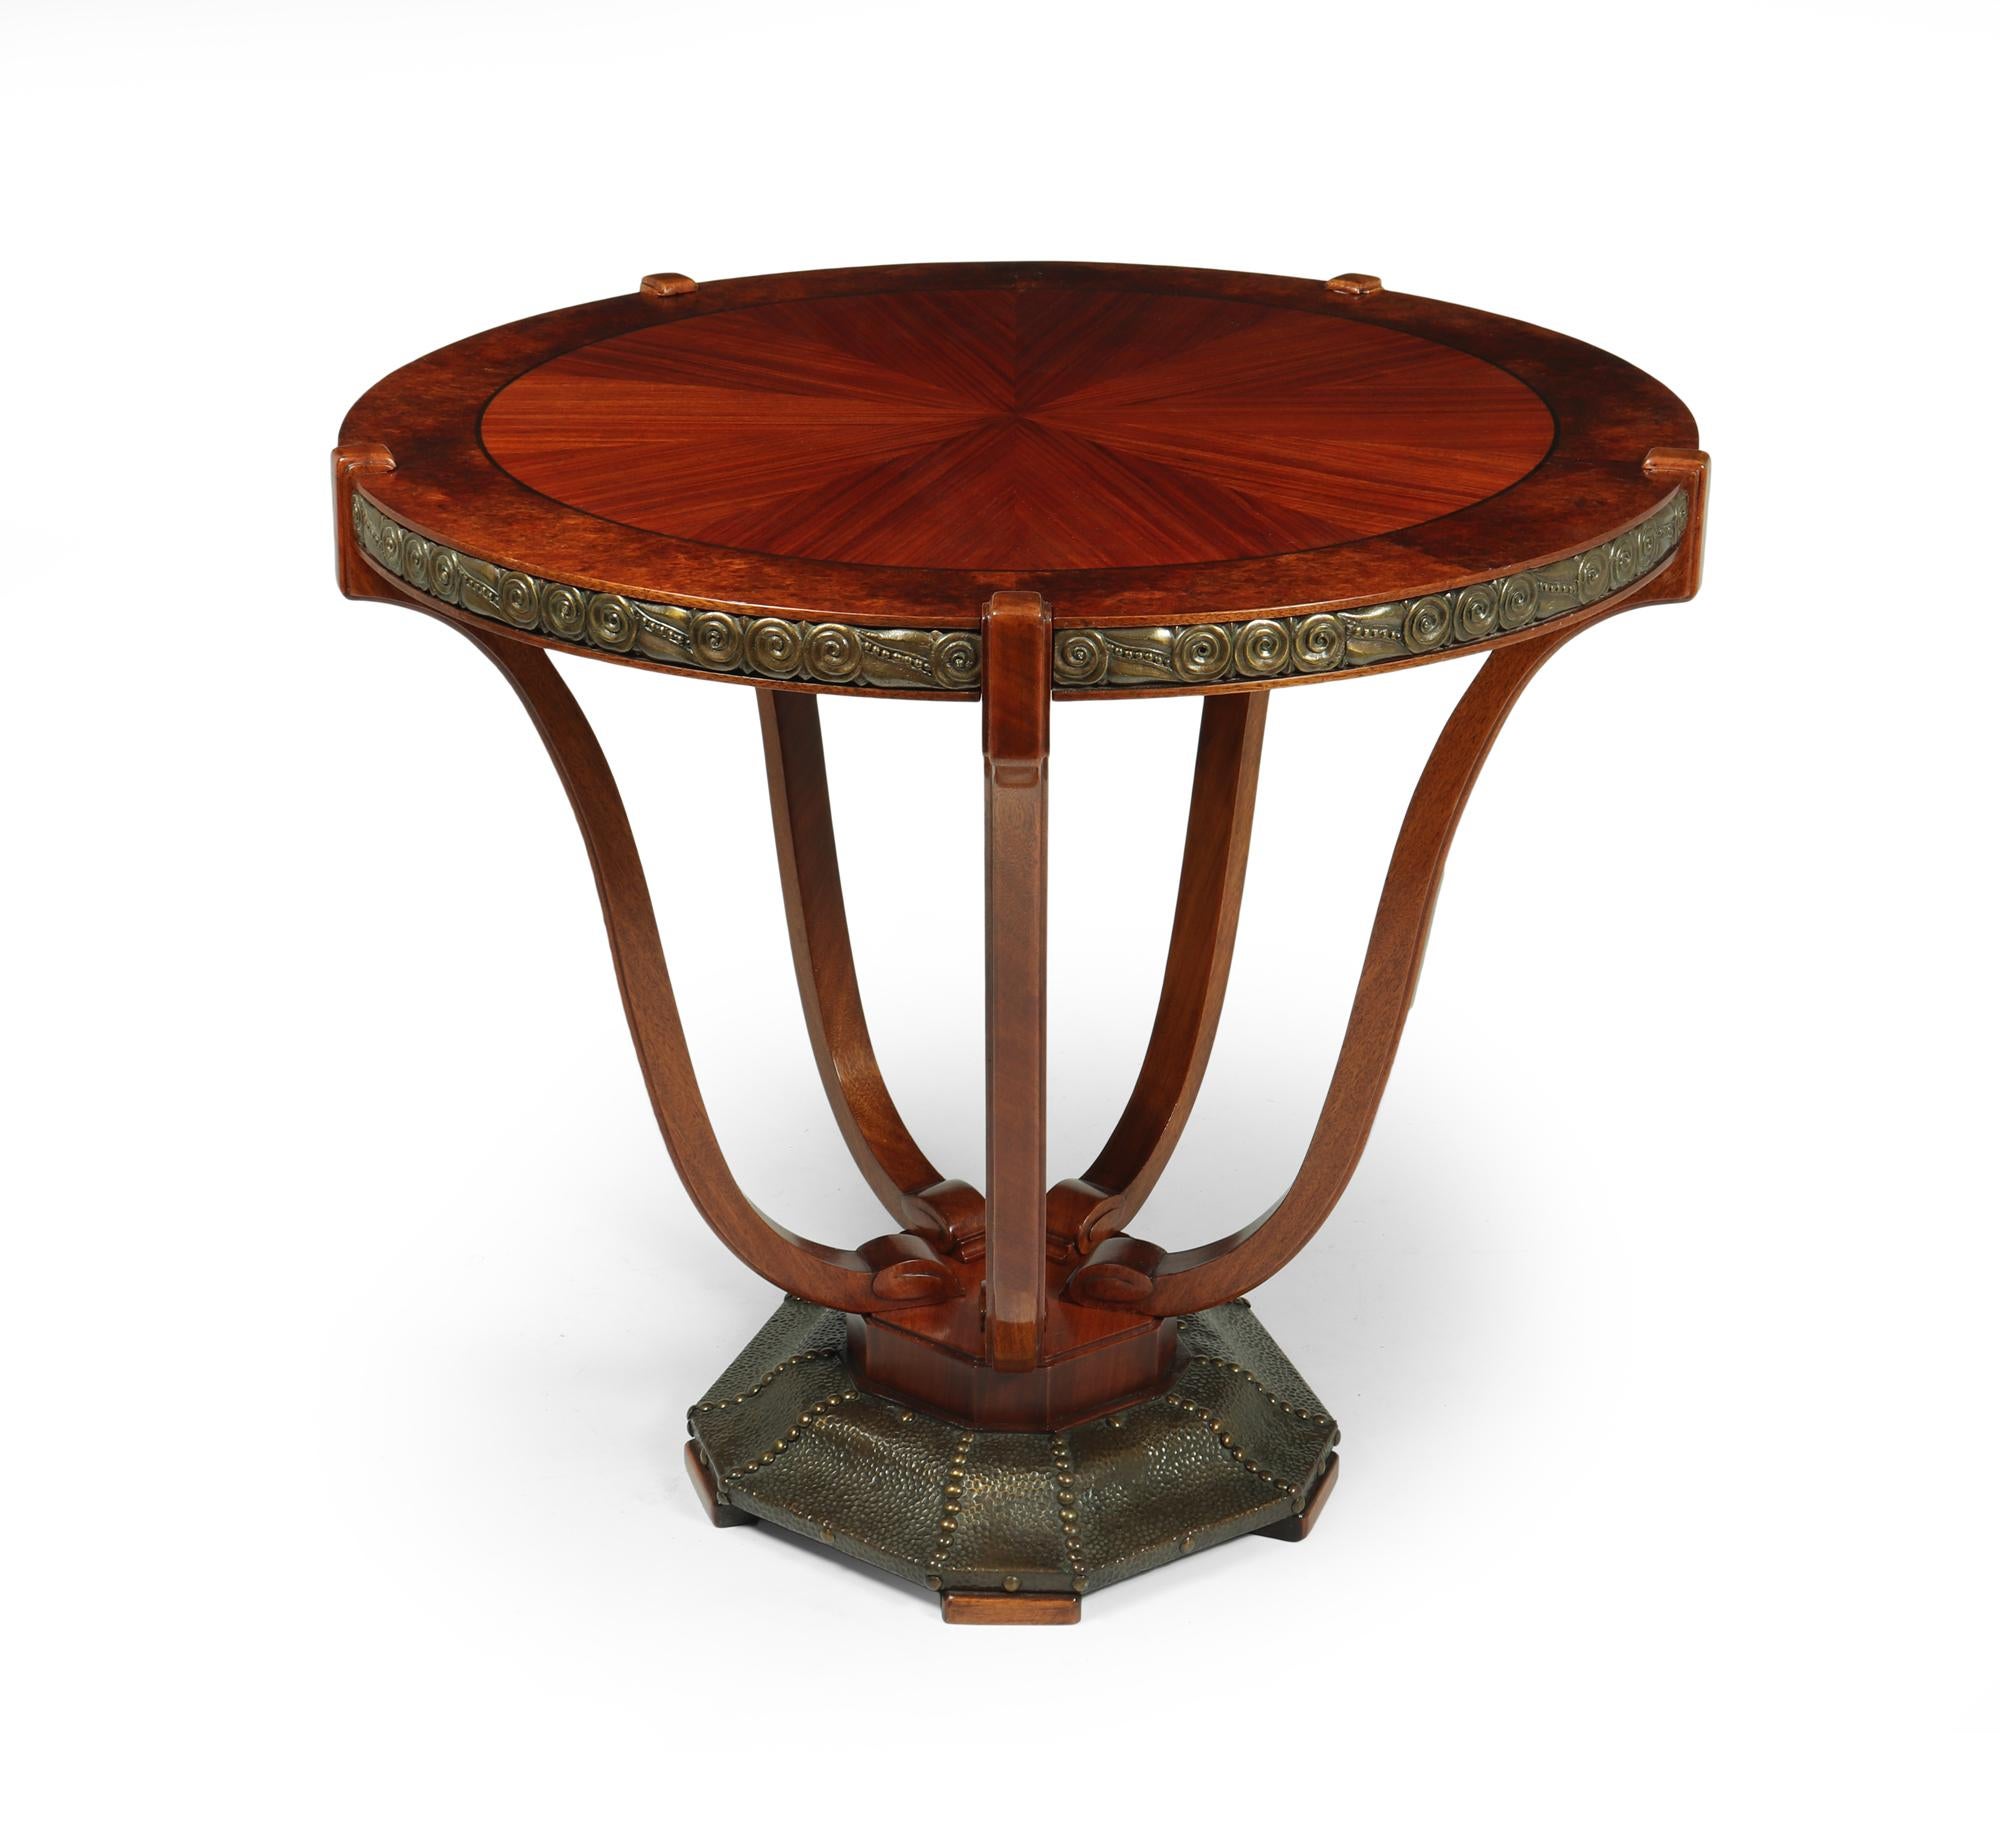 An exceptional quality and style centre table by Maurice Dufrene produced in Paris France 1920-1925 this table has a segmented santos rosewood top cross-banded in amboyna with ebony string lining it has cast bronze mounts five solid mahogany shaped